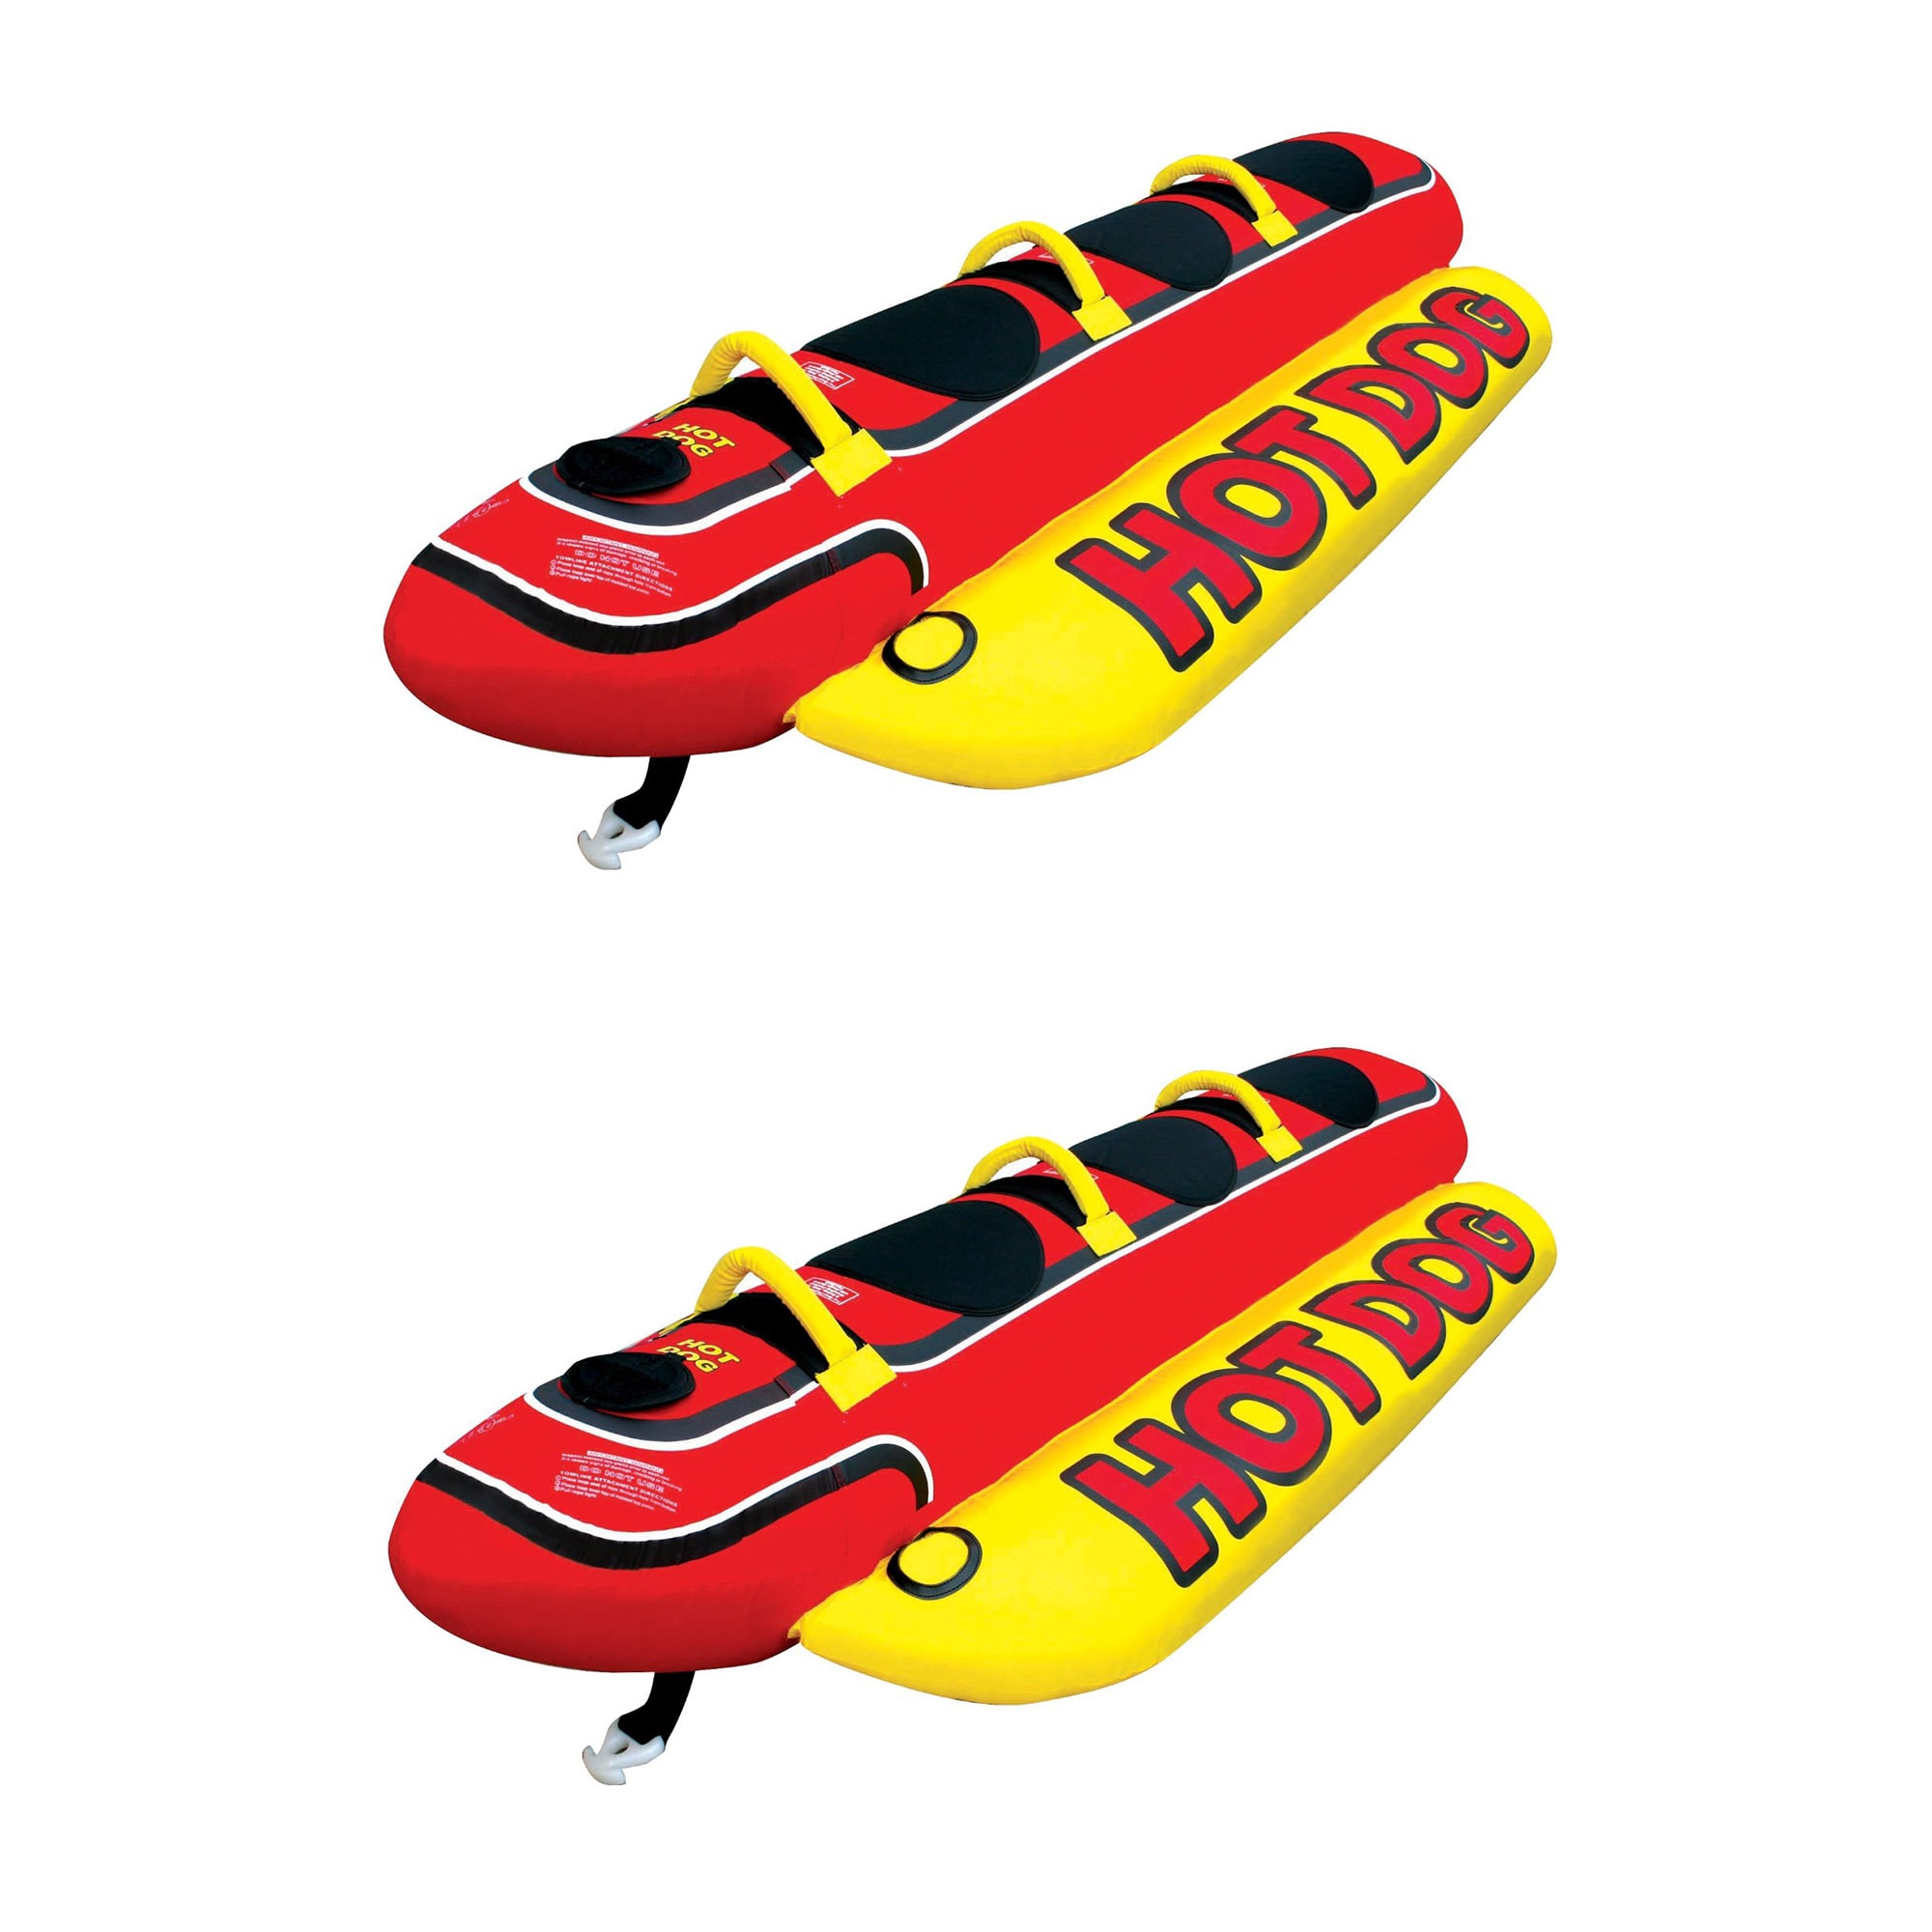 AIRHEAD HD-3 3 Person Hot Dog Inflatable Towable for sale online 